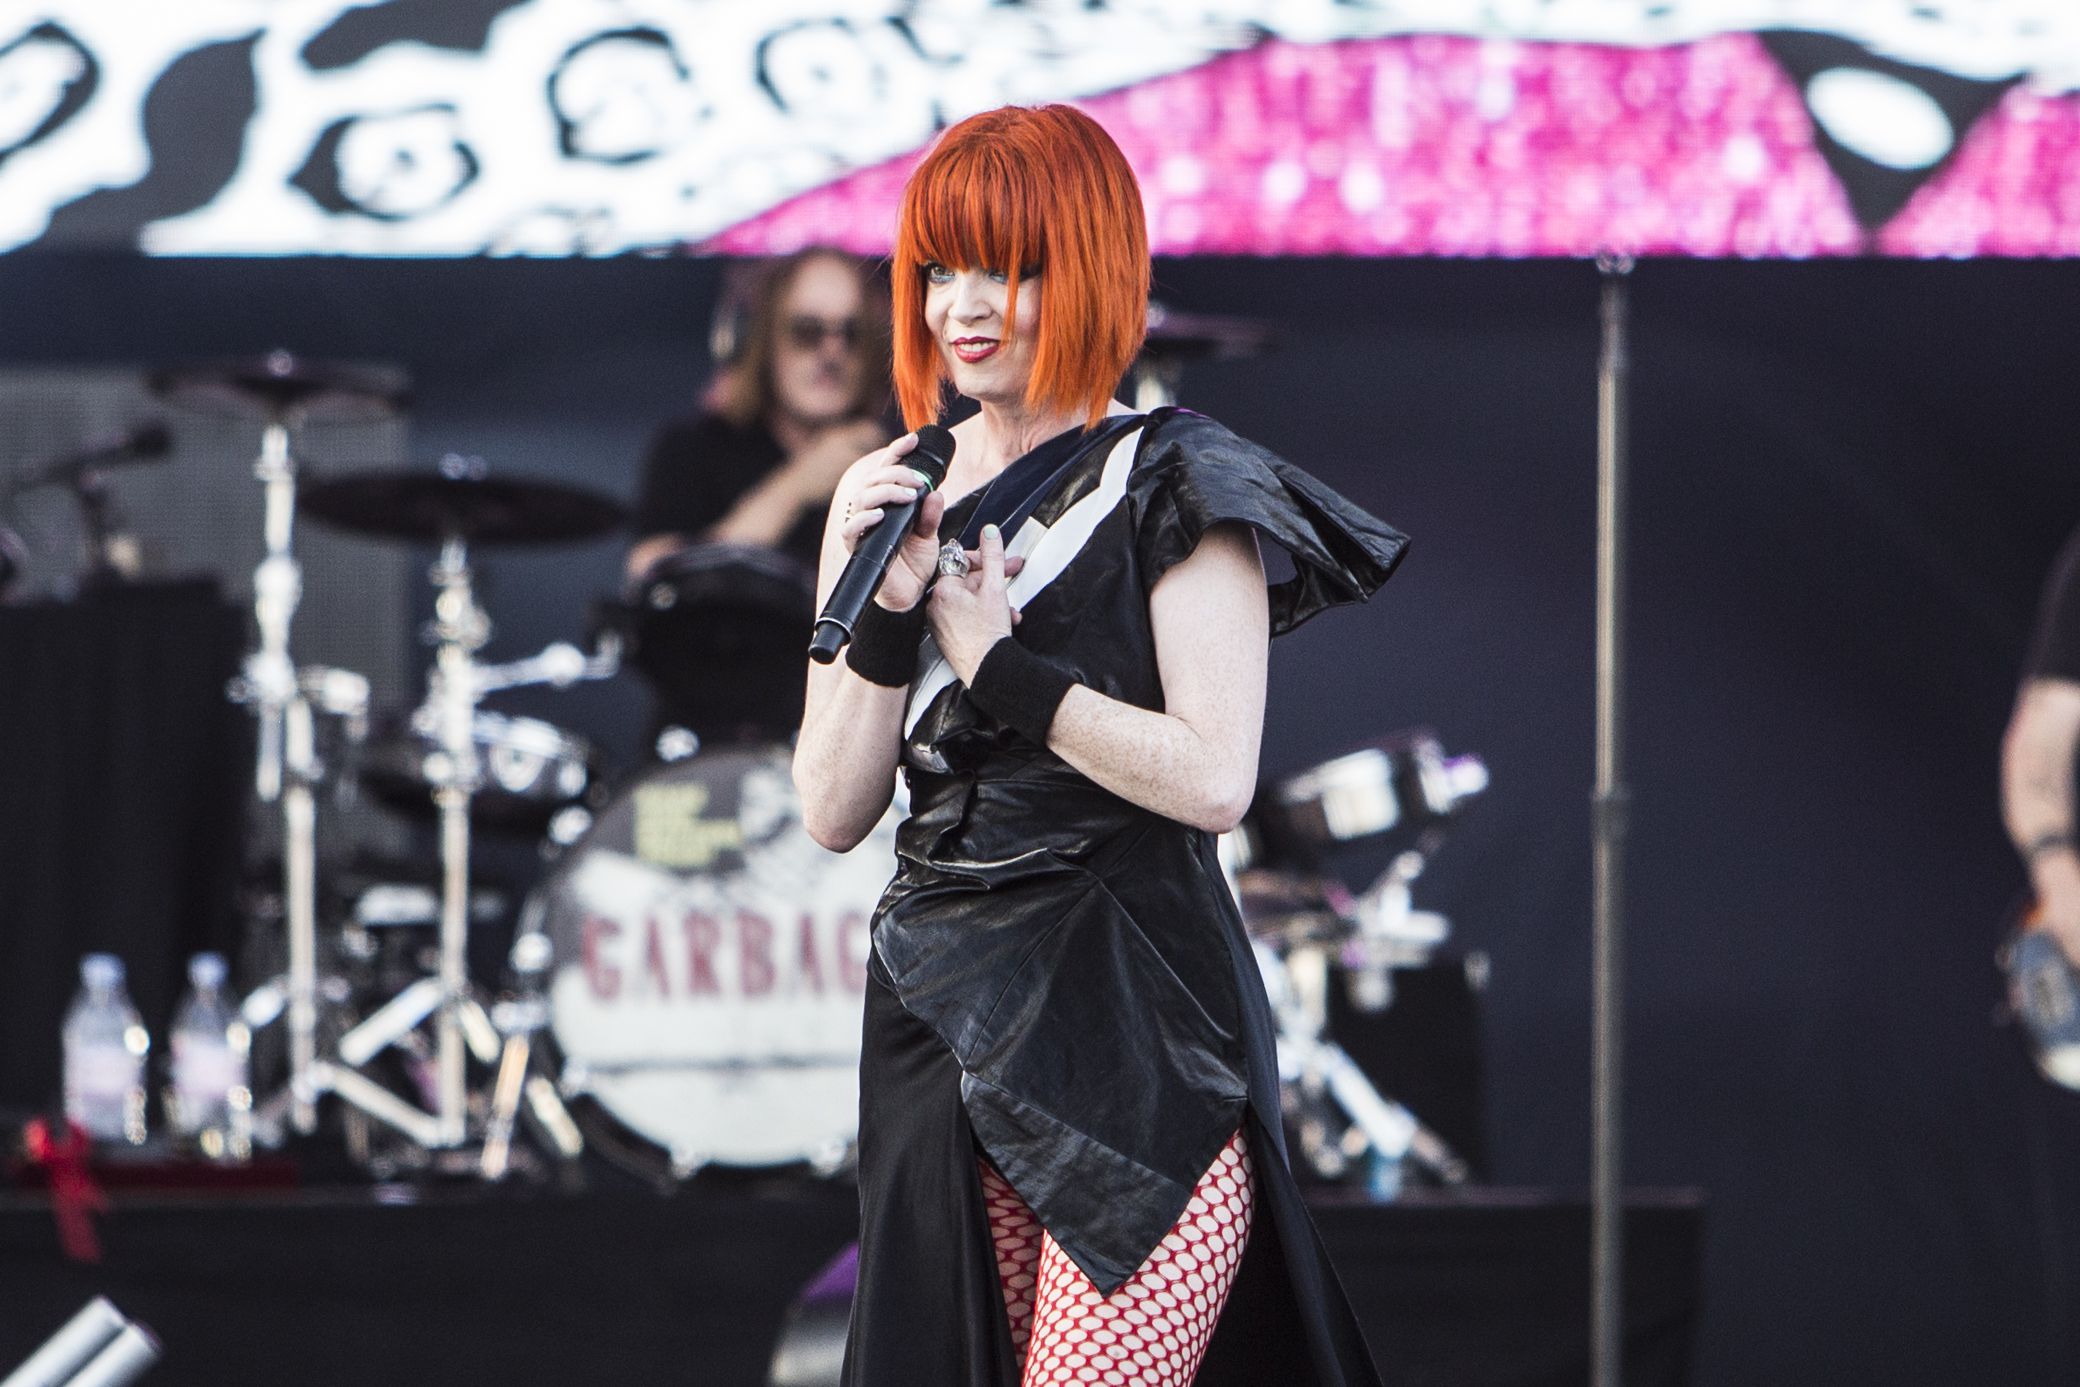 garbage 4 KAABOO Del Mar Succeeds at Being a Festival for Everyone